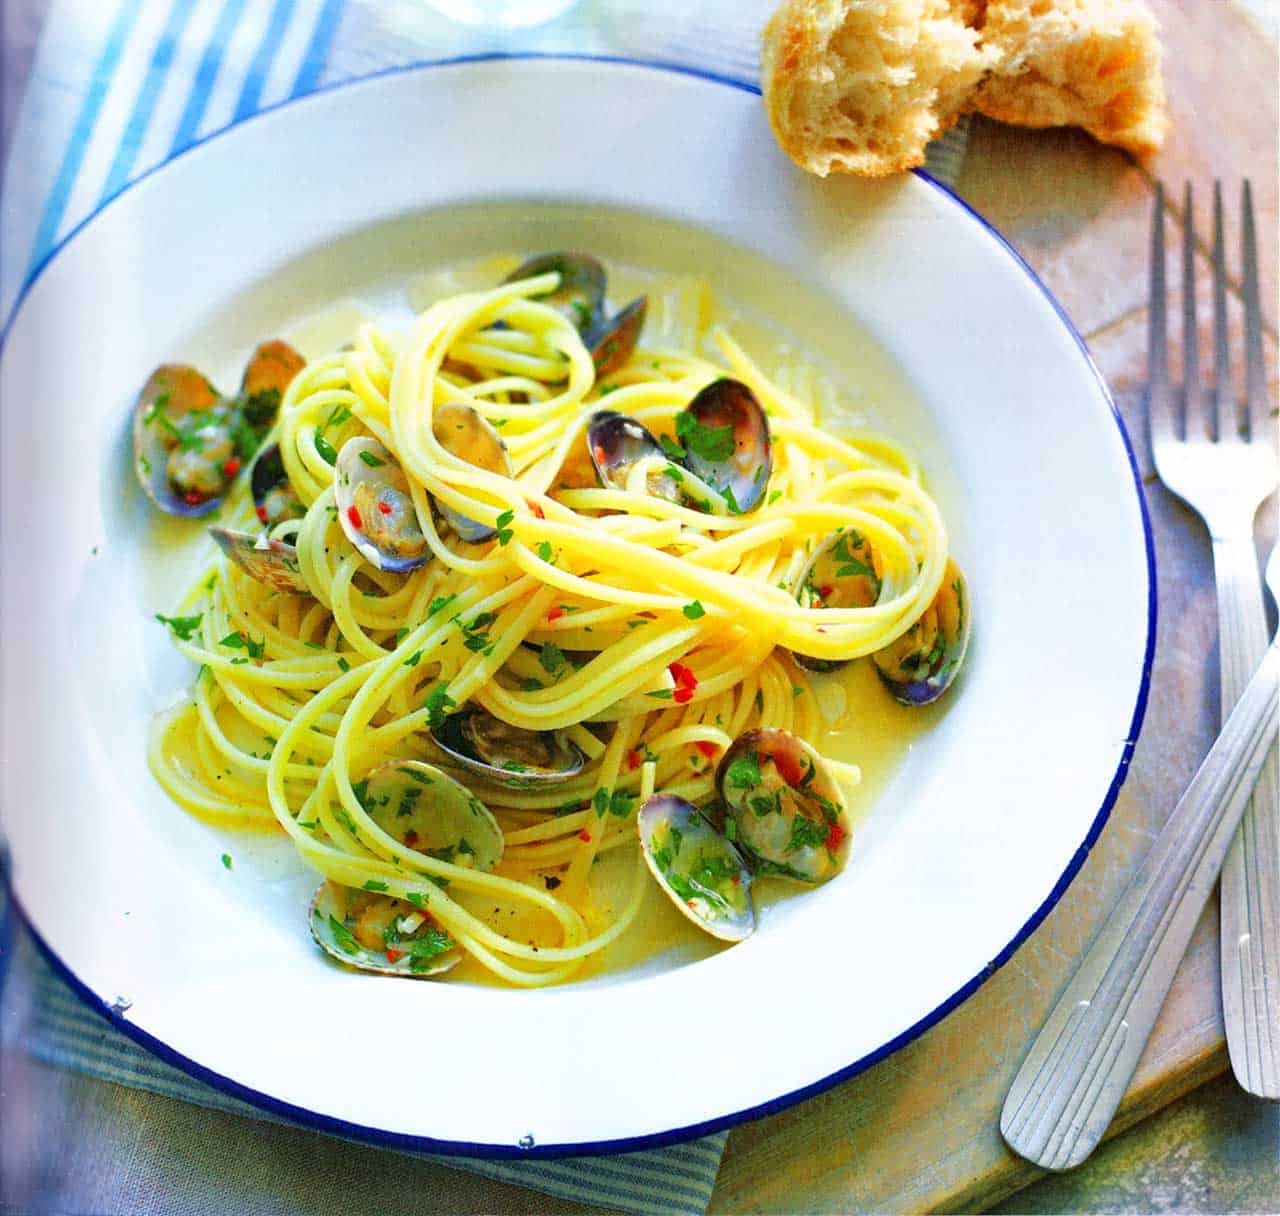 Clams with linguine pasta-linguine with clams recipe